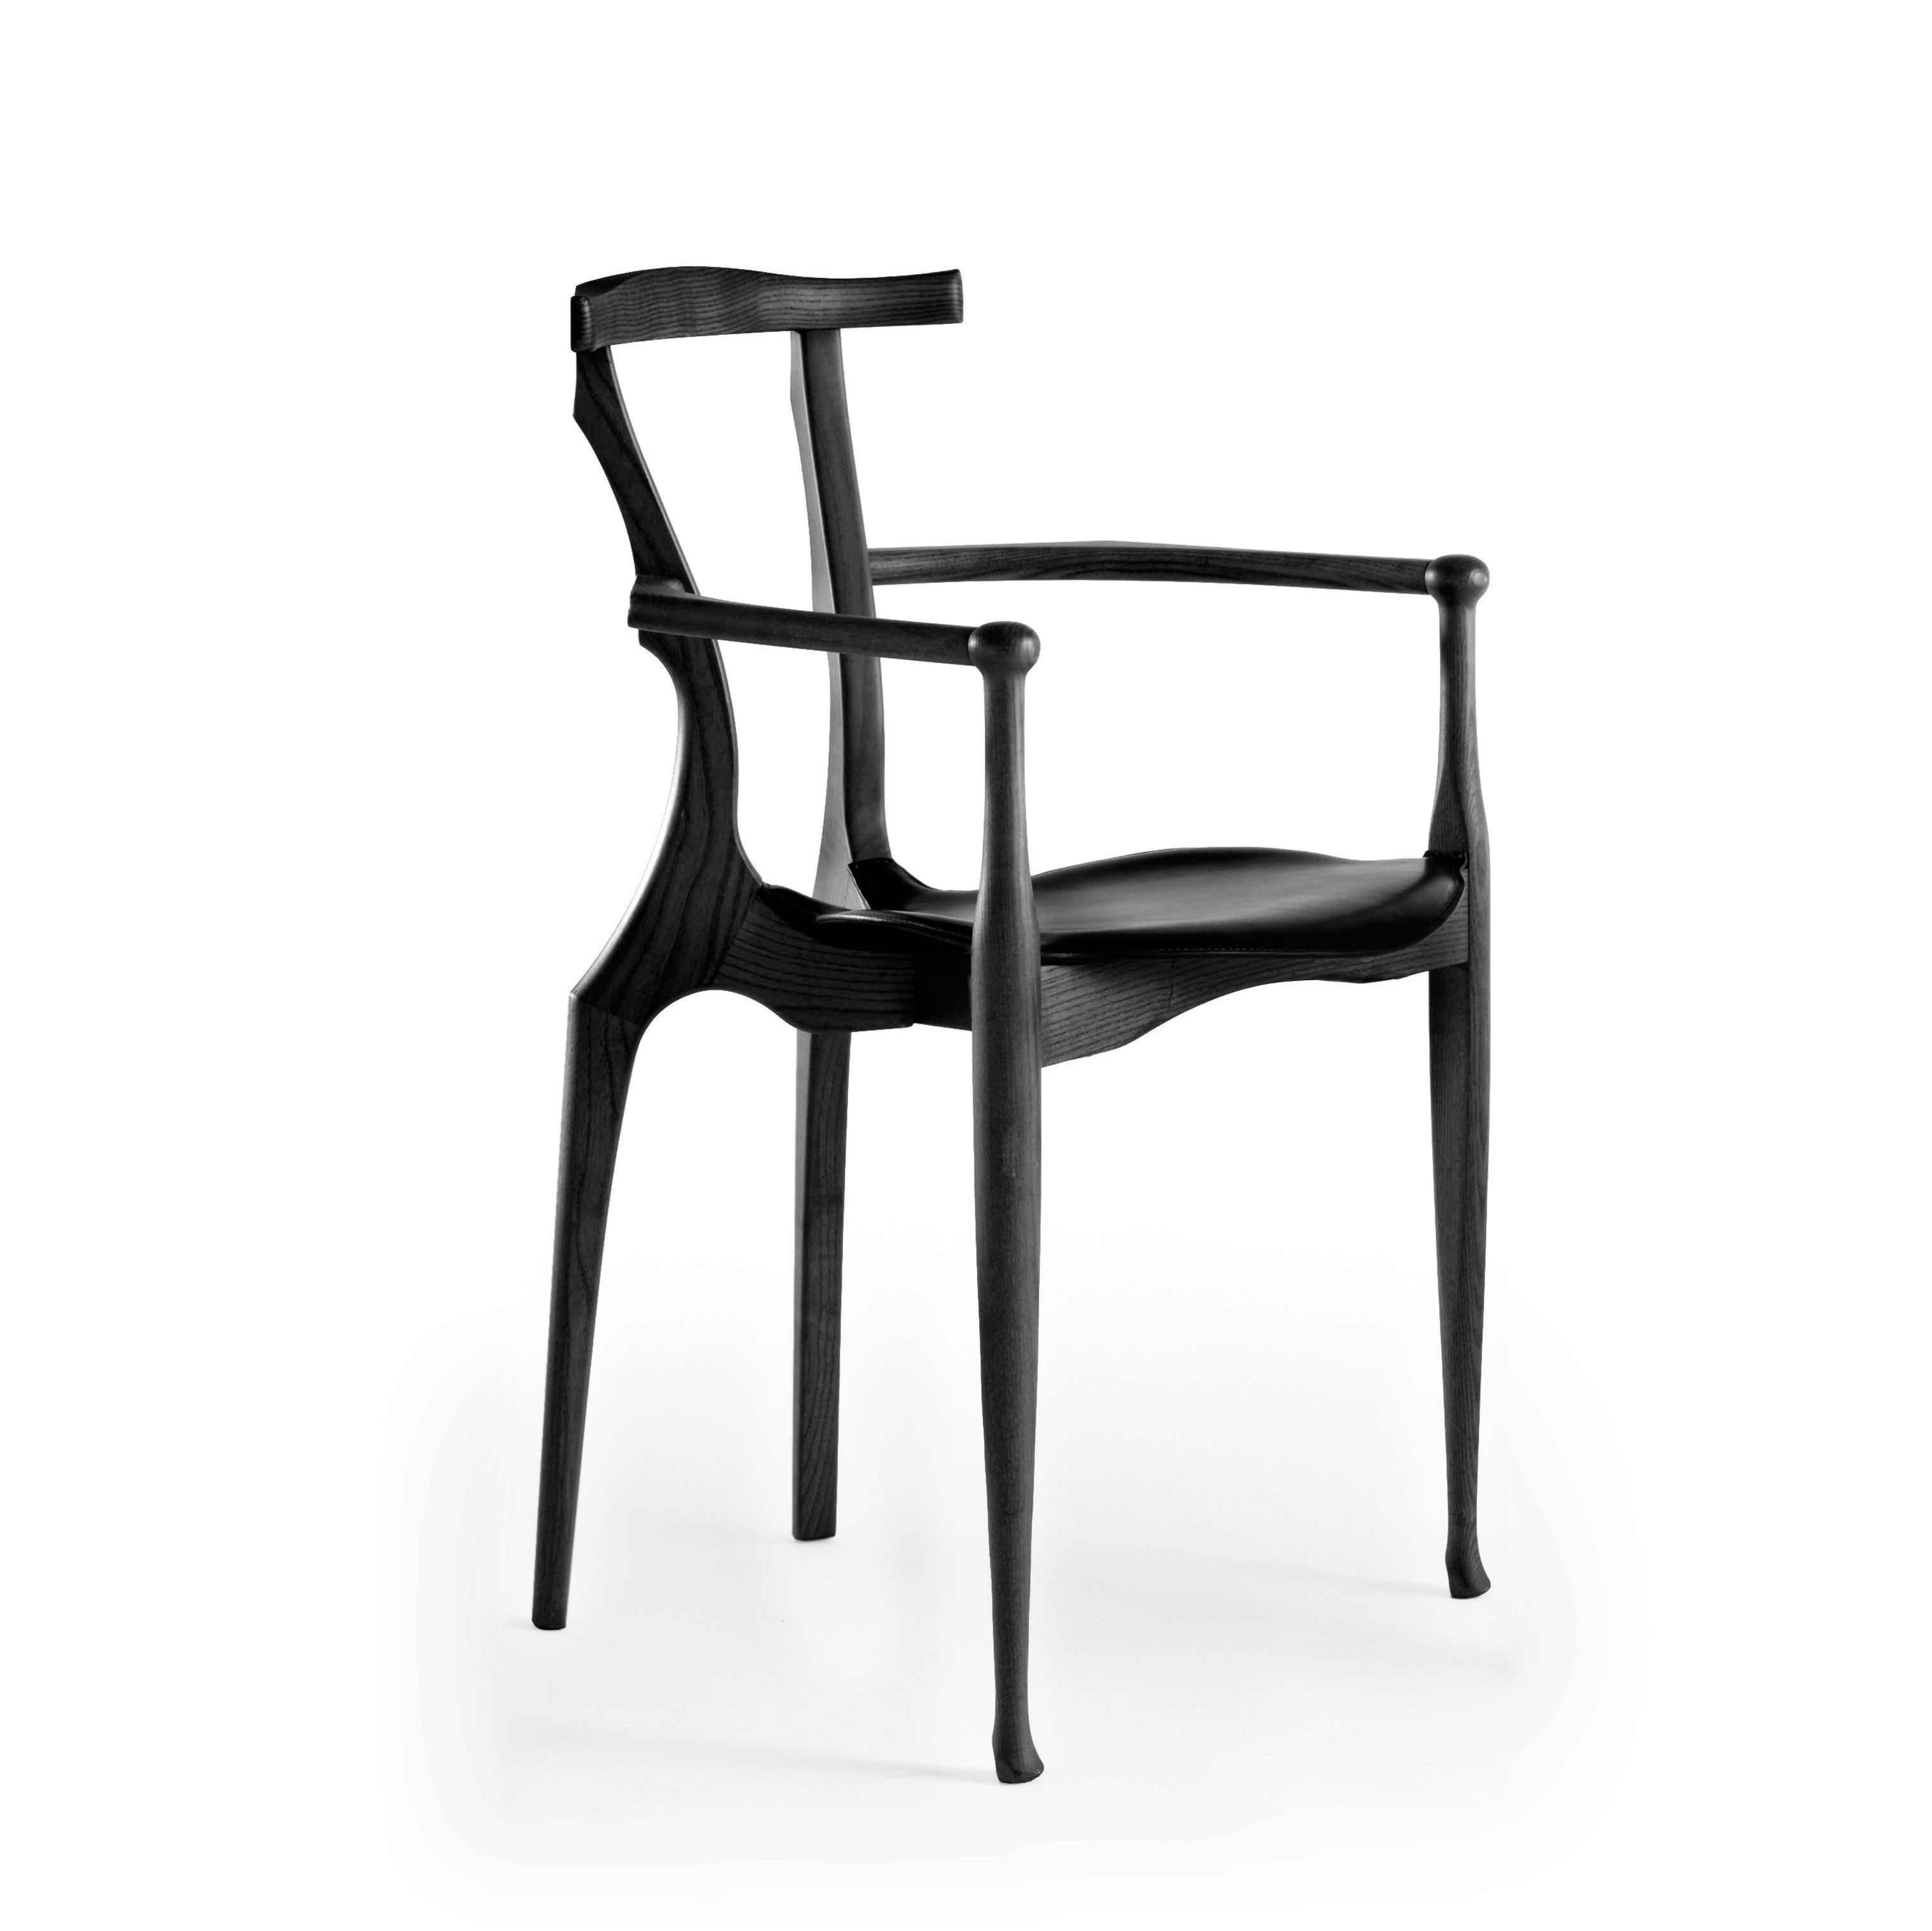 Set of eight Gaulino Chairs designed by Oscar Tusquets manufactured by BD Barcelona Design, circa 2010.

Gaulino chair which, designed in 1987, was selected for the Industrial Design prize and Adi-Fad in1989 and in Iberdiseño in 1990.
Since then